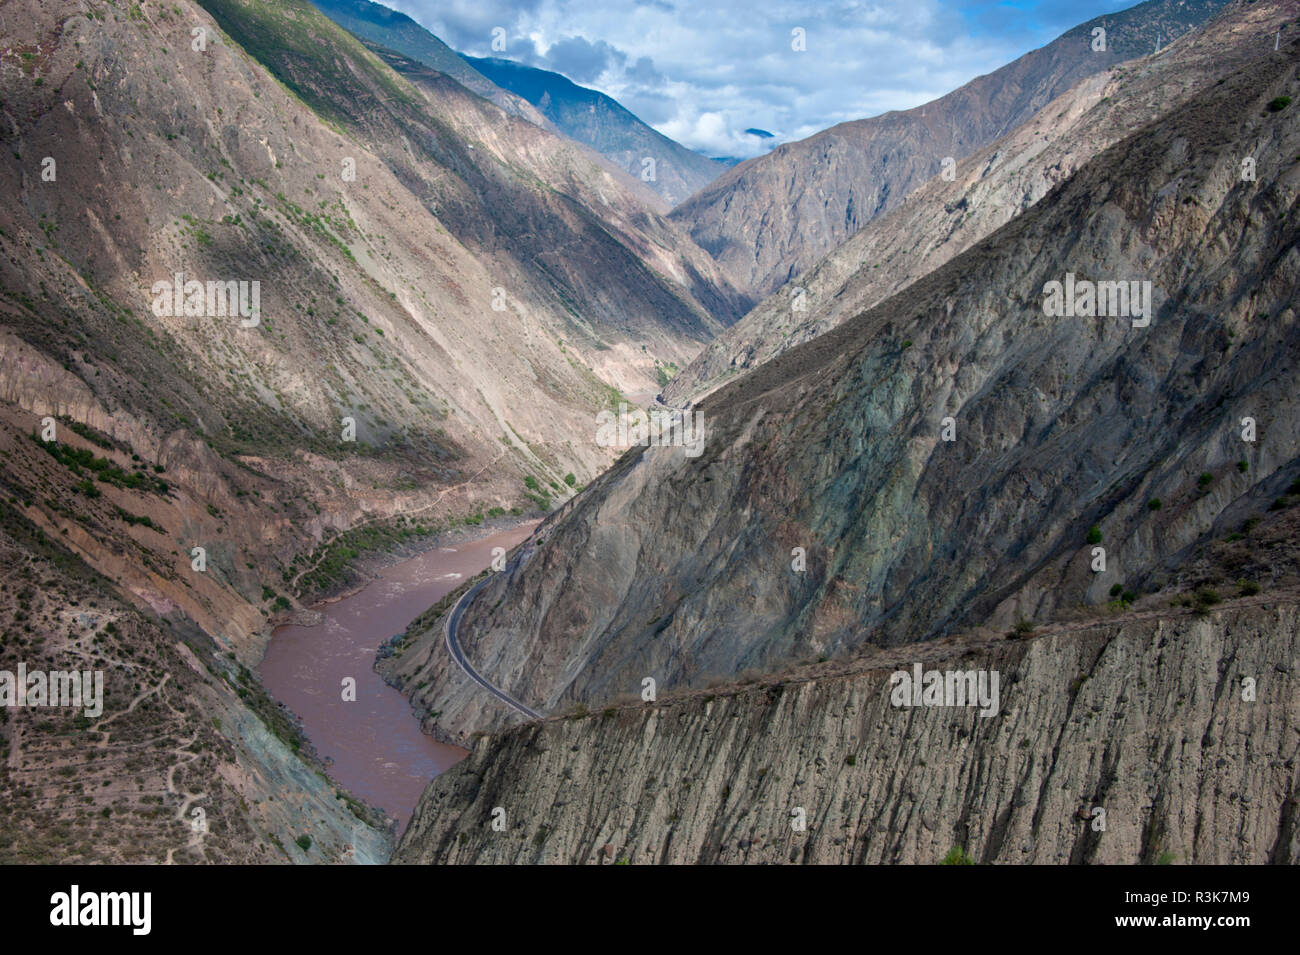 China, Yunnan Province, Deqin County. View of Lancang River near Zha'an village seen from National Highway 214. Stock Photo